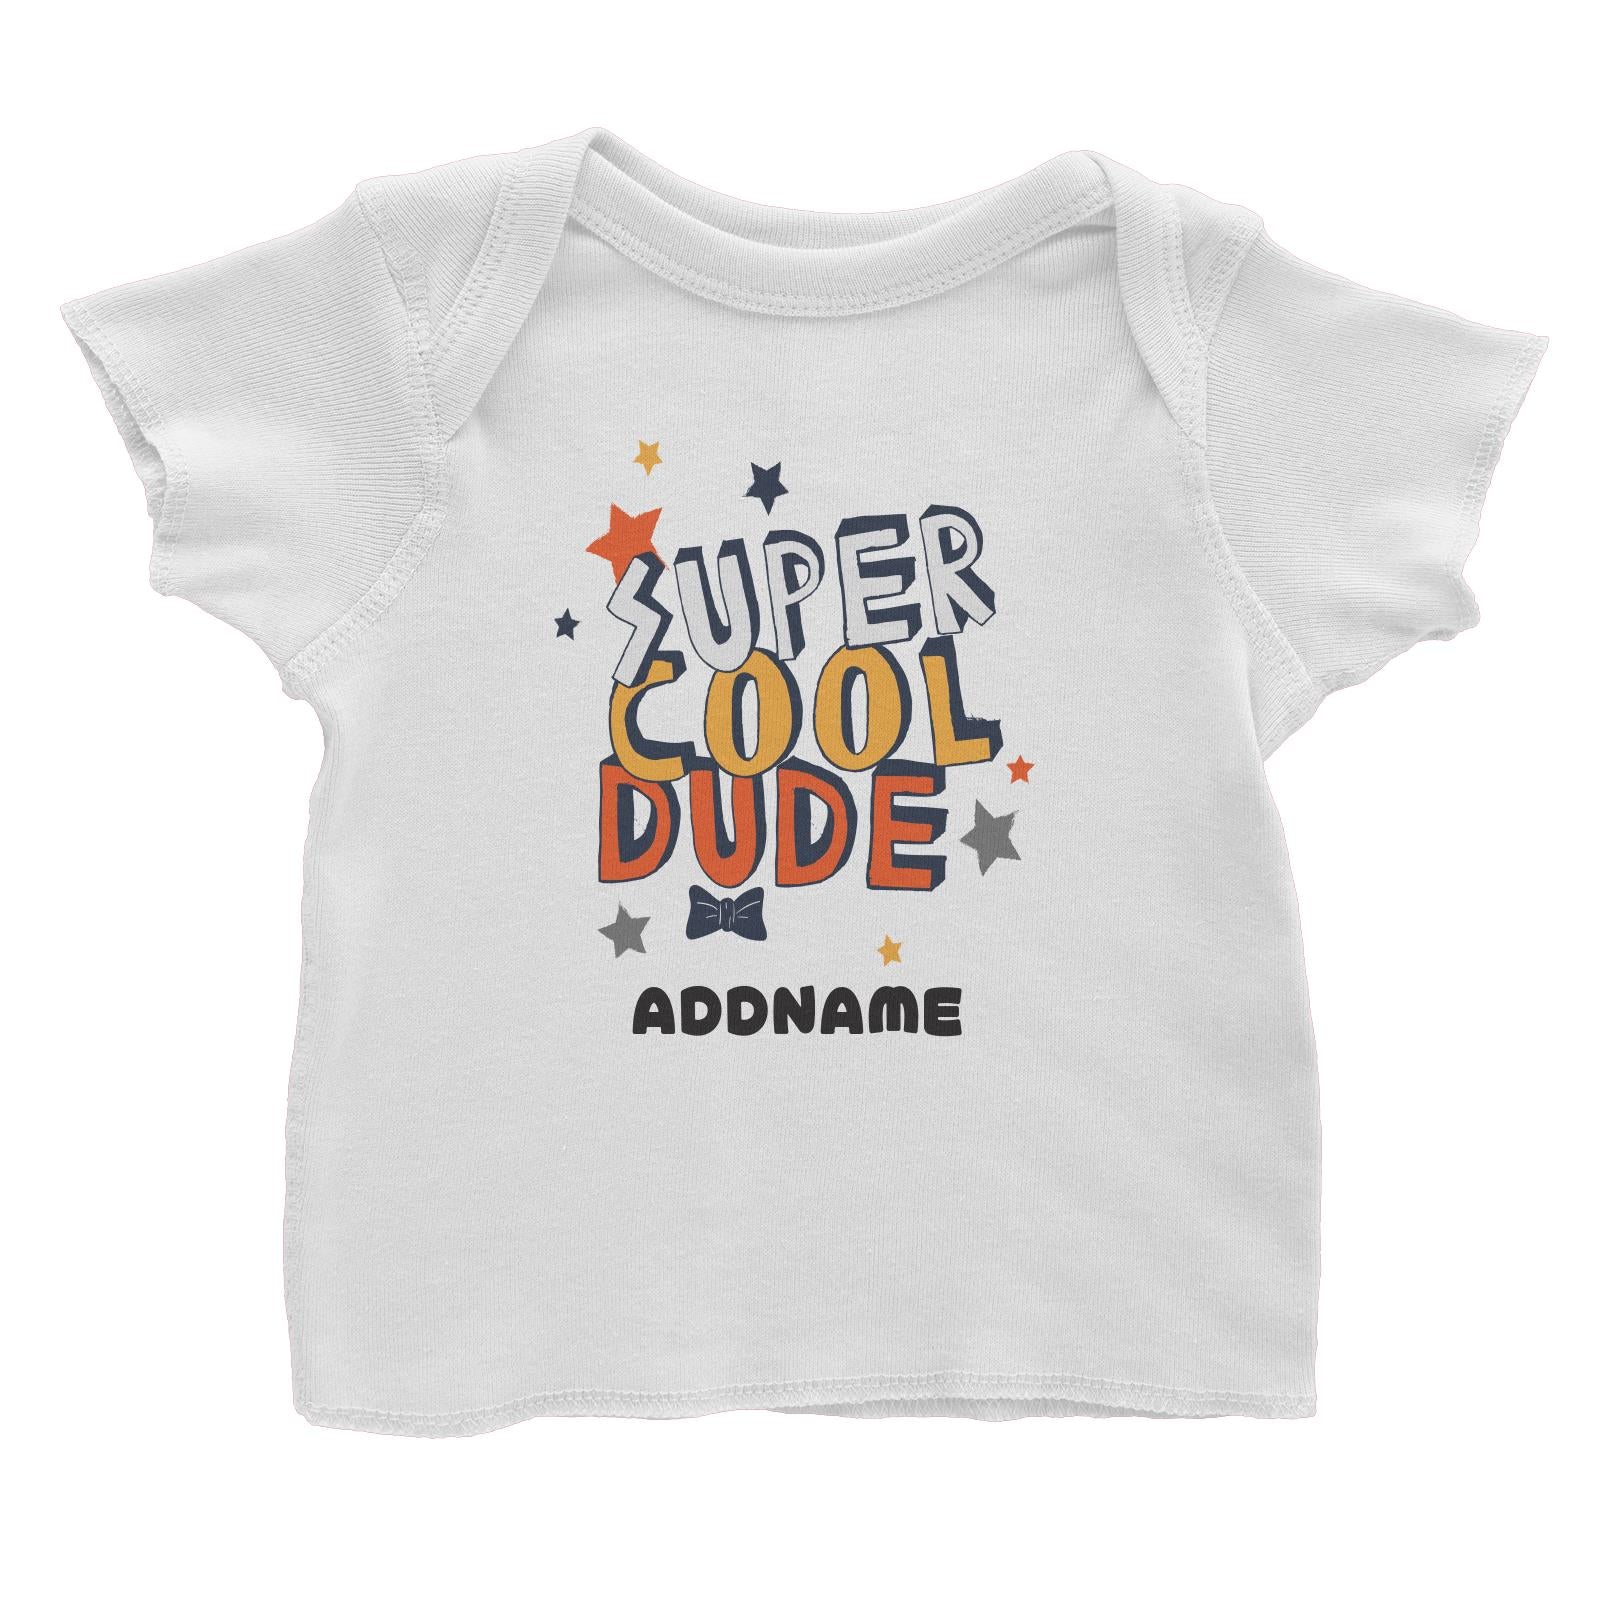 Super Cool Dude with Bow Tie Addname White Baby T-Shirt